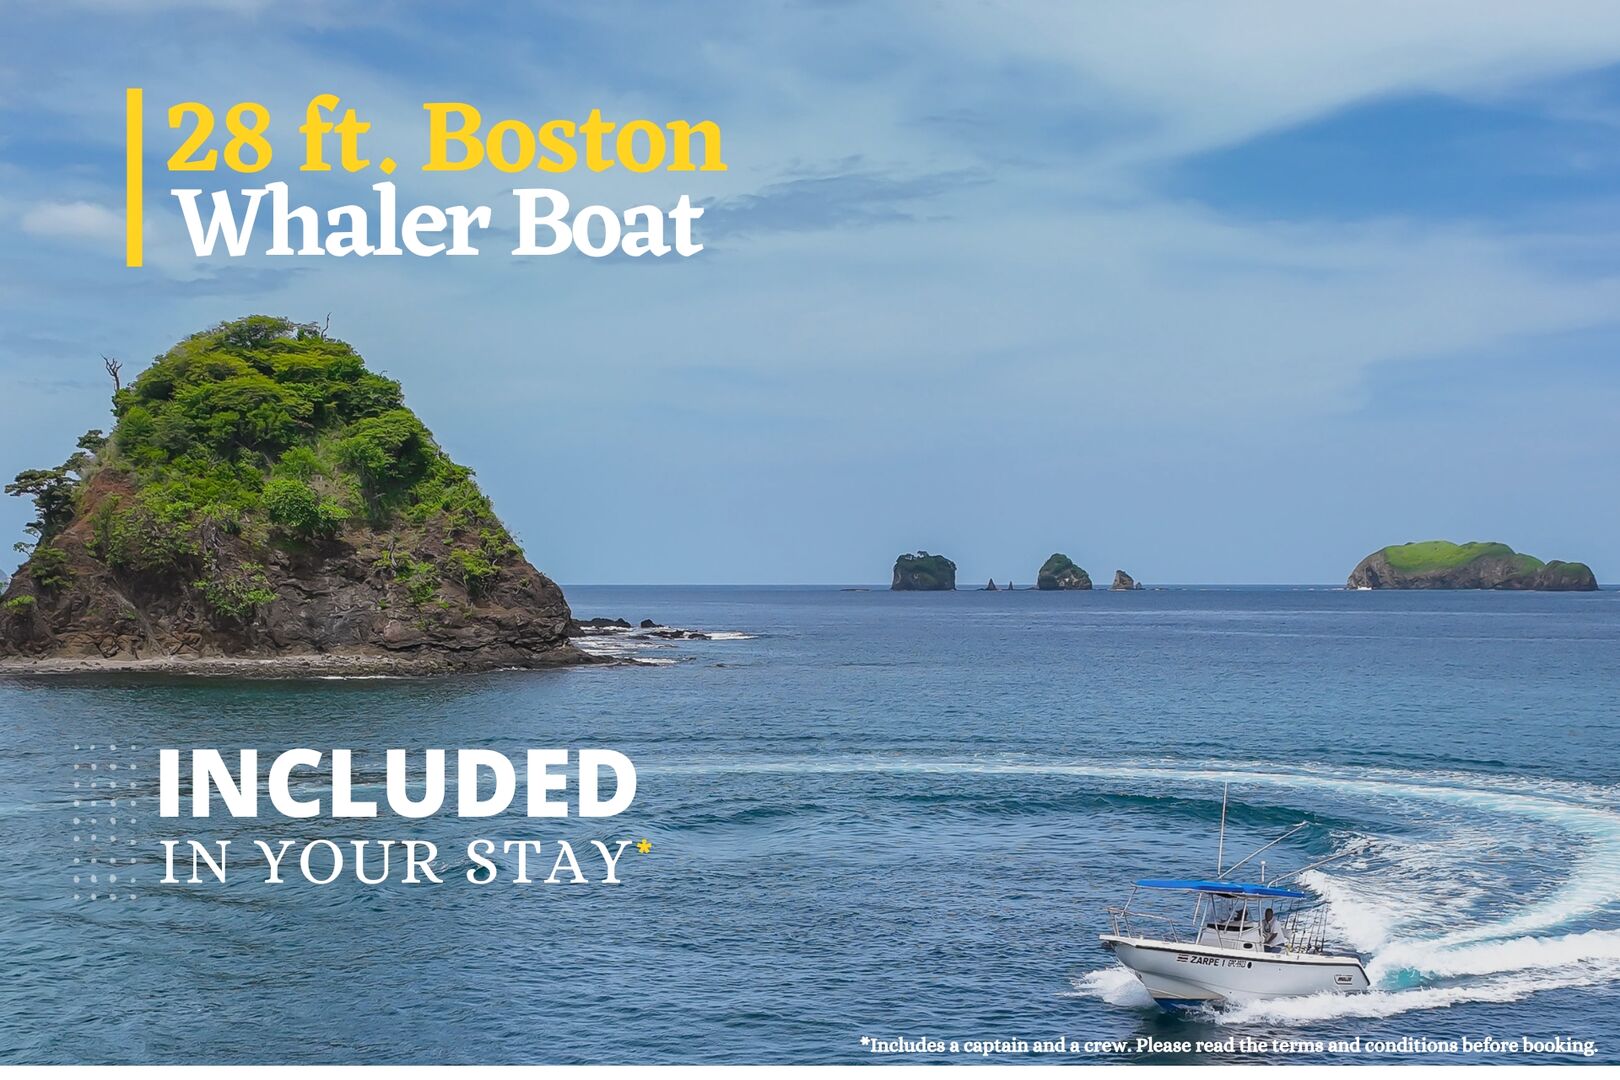 1 Boat tour included in your stay*